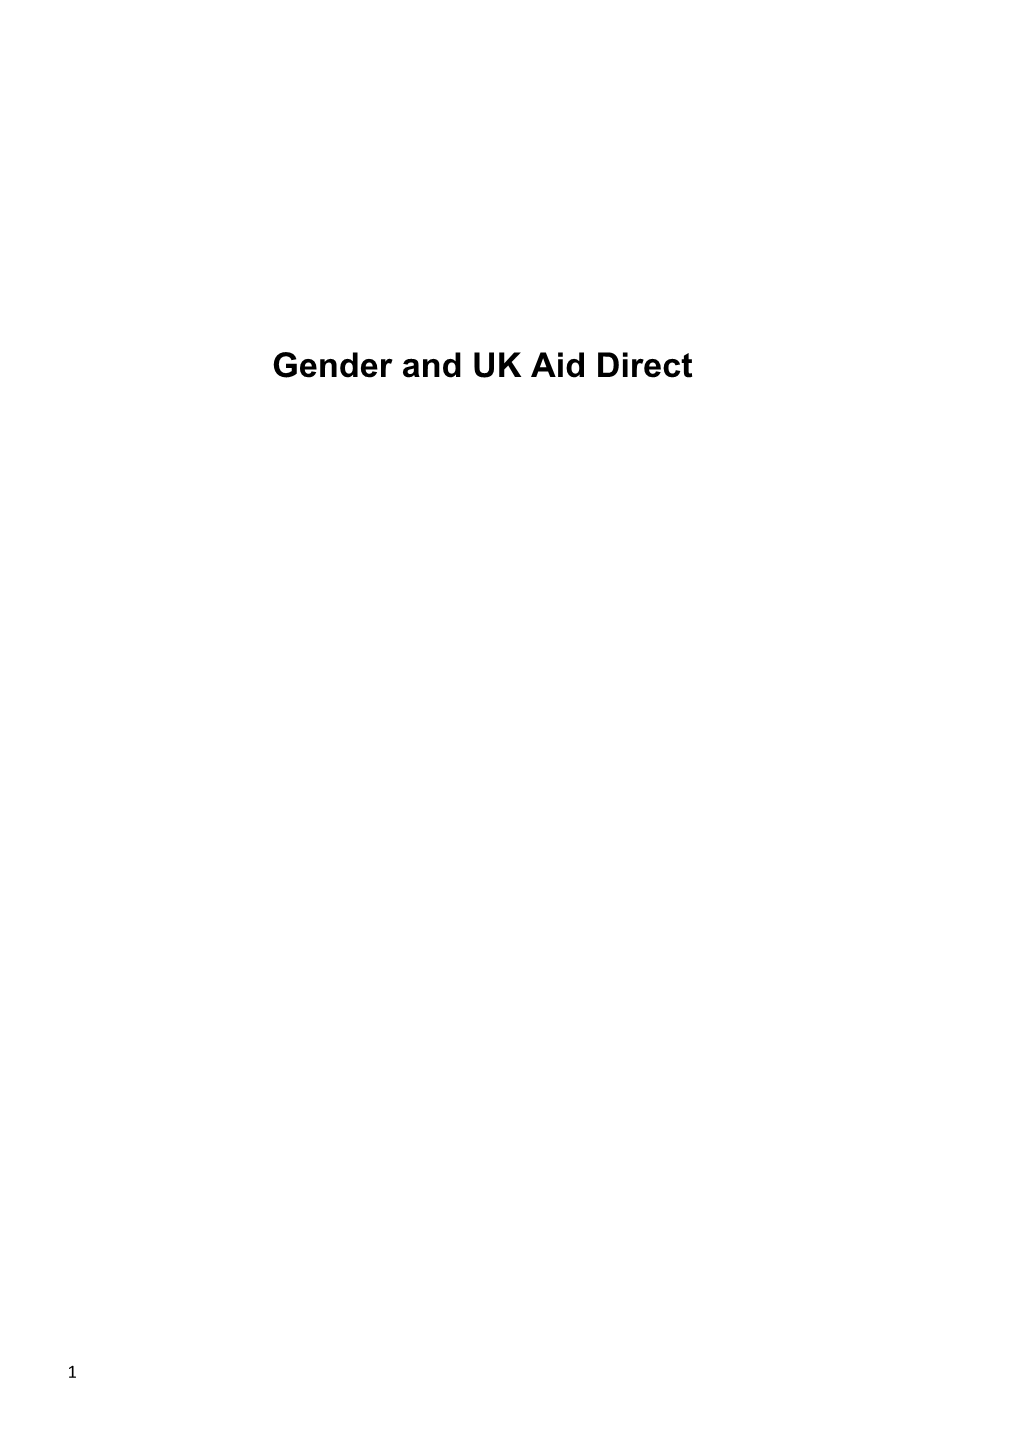 Gender and UK Aid Direct